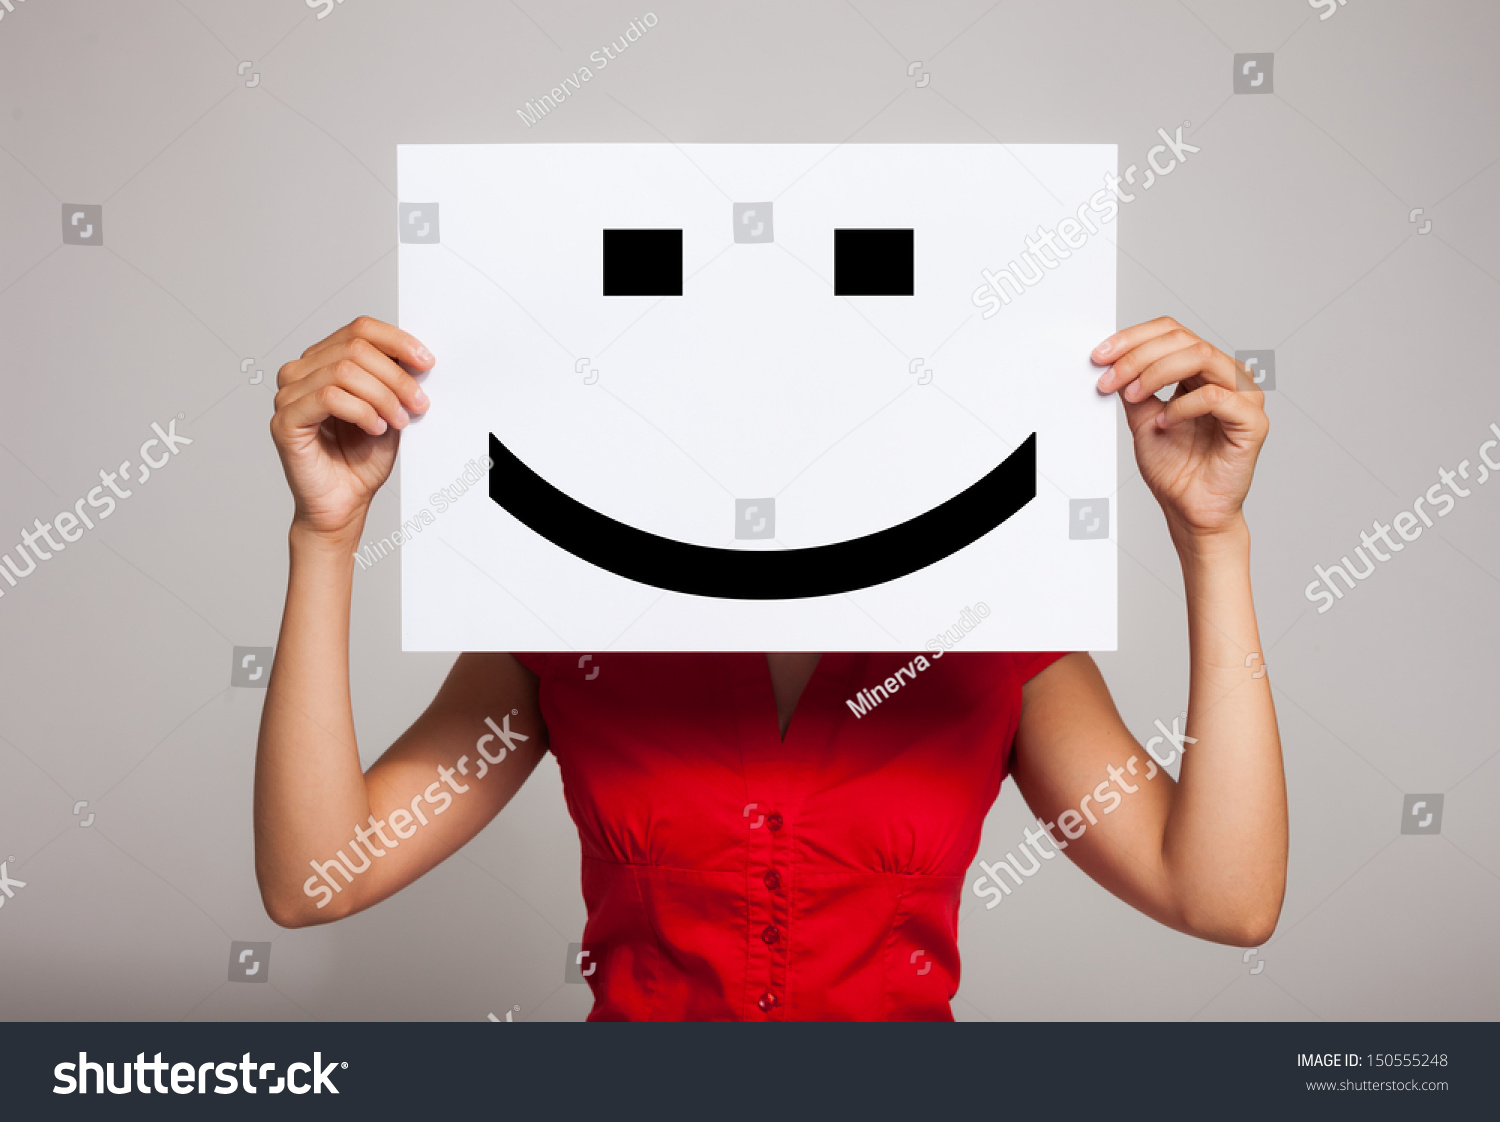 Woman holding a smiling face emoticon #150555248